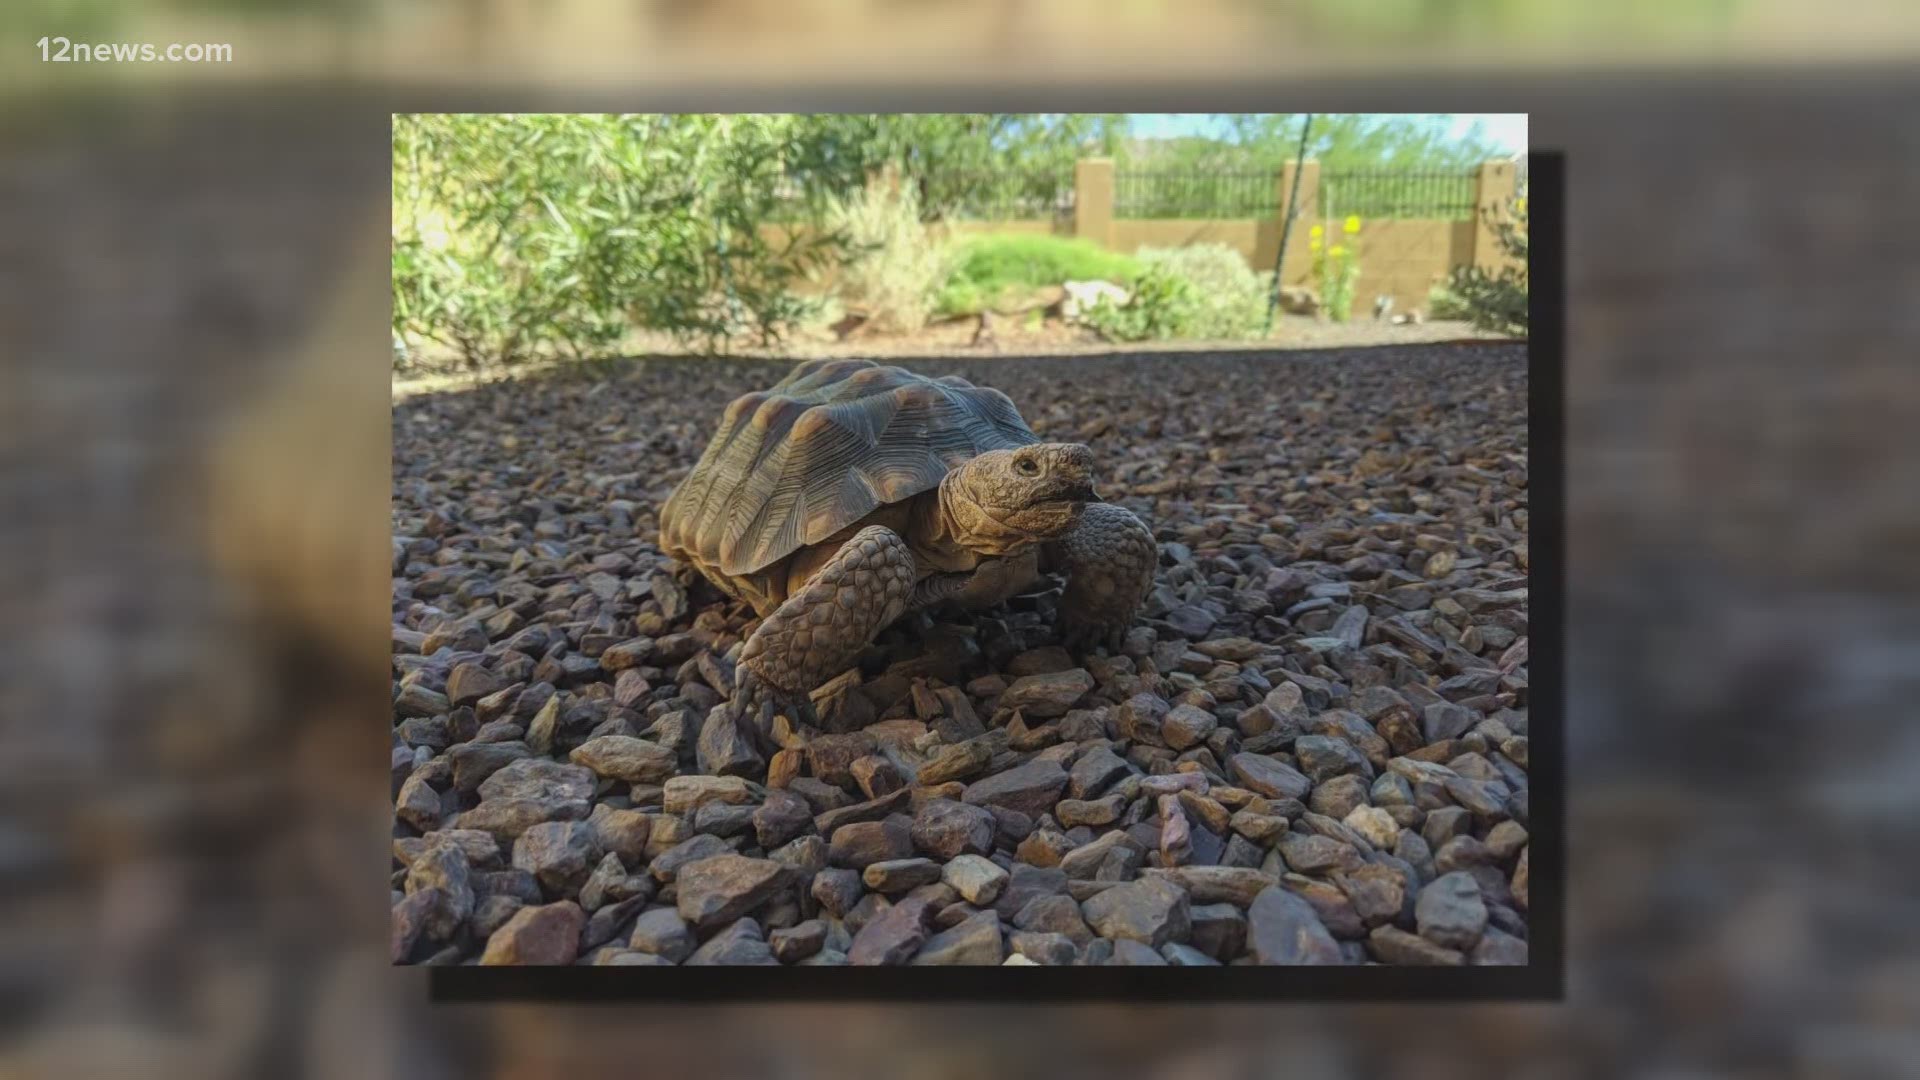 Arizona Game and Fish have set up a program for people to begin adopting desert tortoises, who they say make a wonderful addition to families.